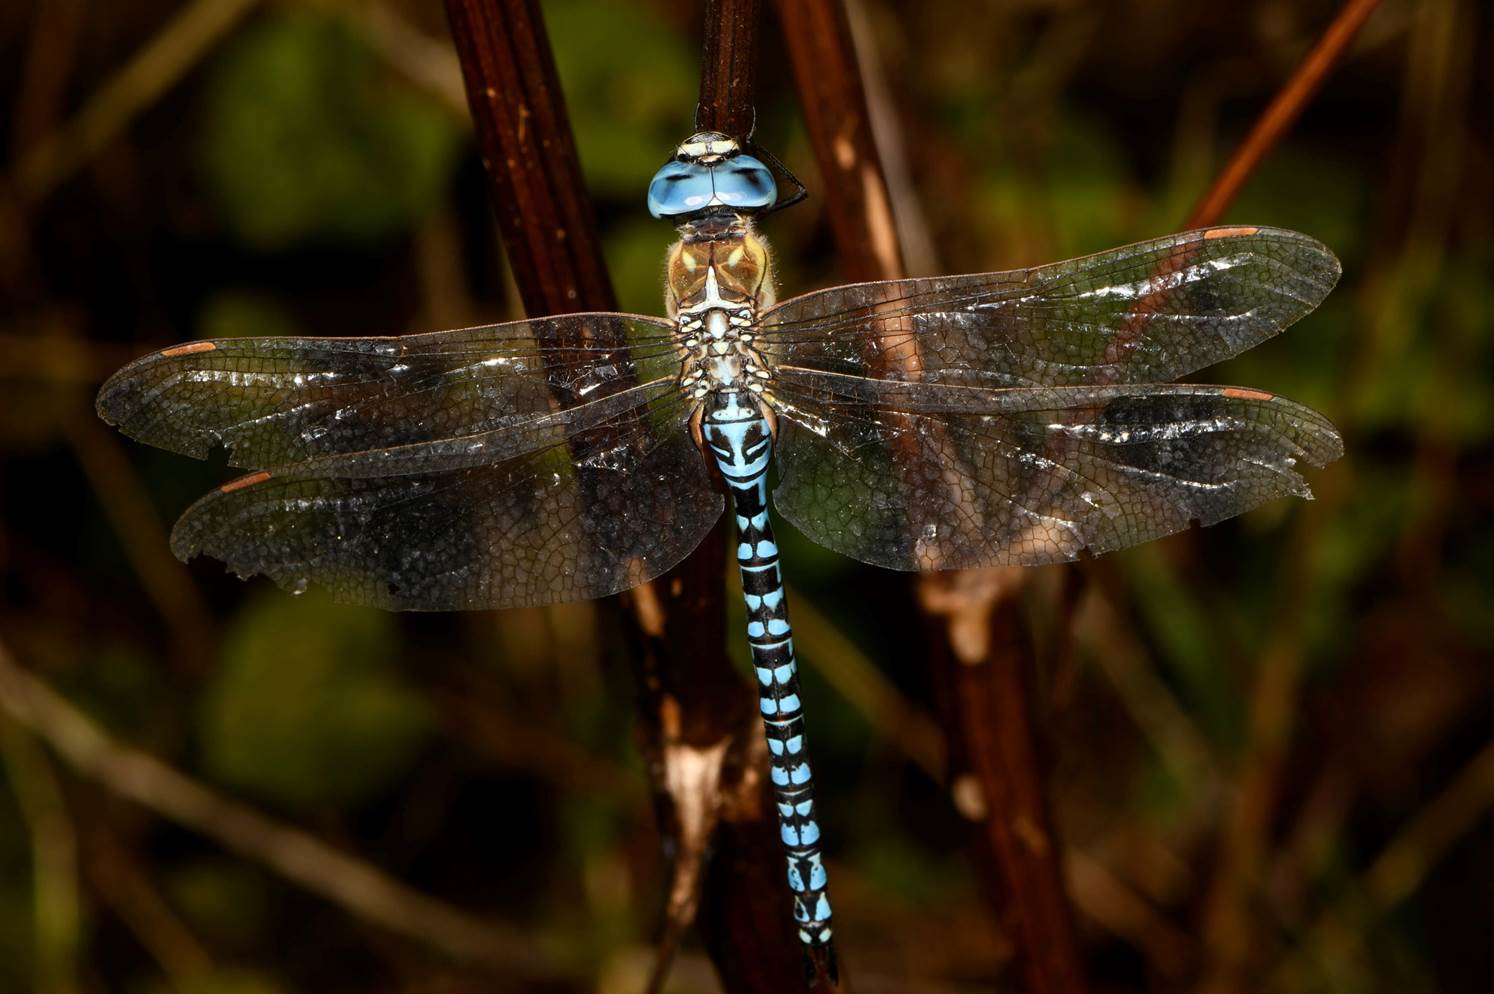 A close-up of a dragonfly

Description automatically generated